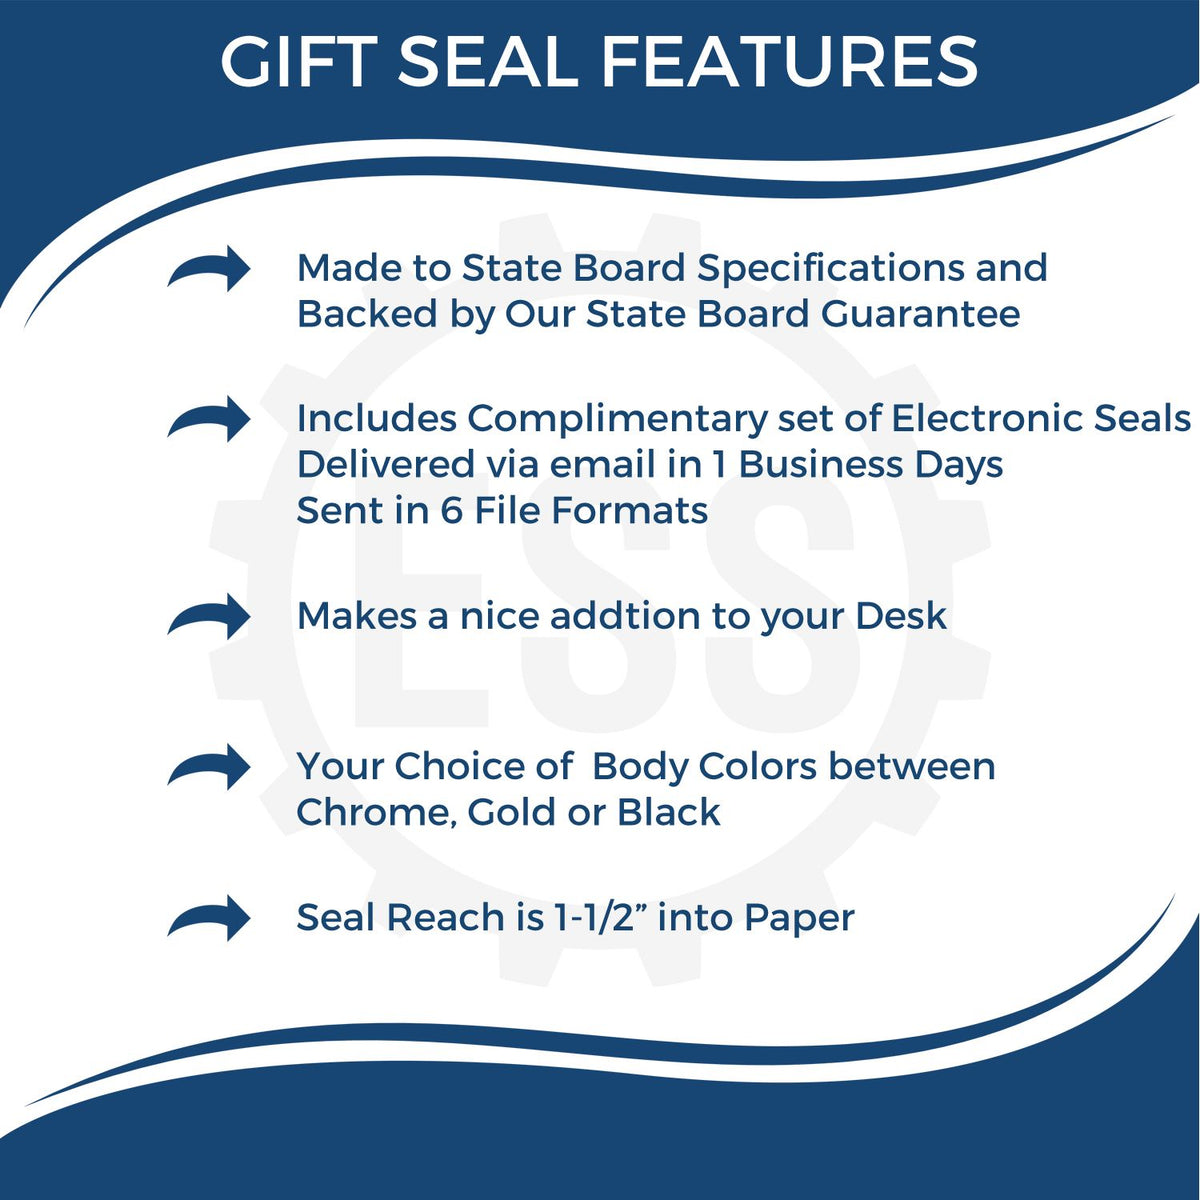 A picture of an infographic highlighting the selling points for the Gift Kansas Engineer Seal